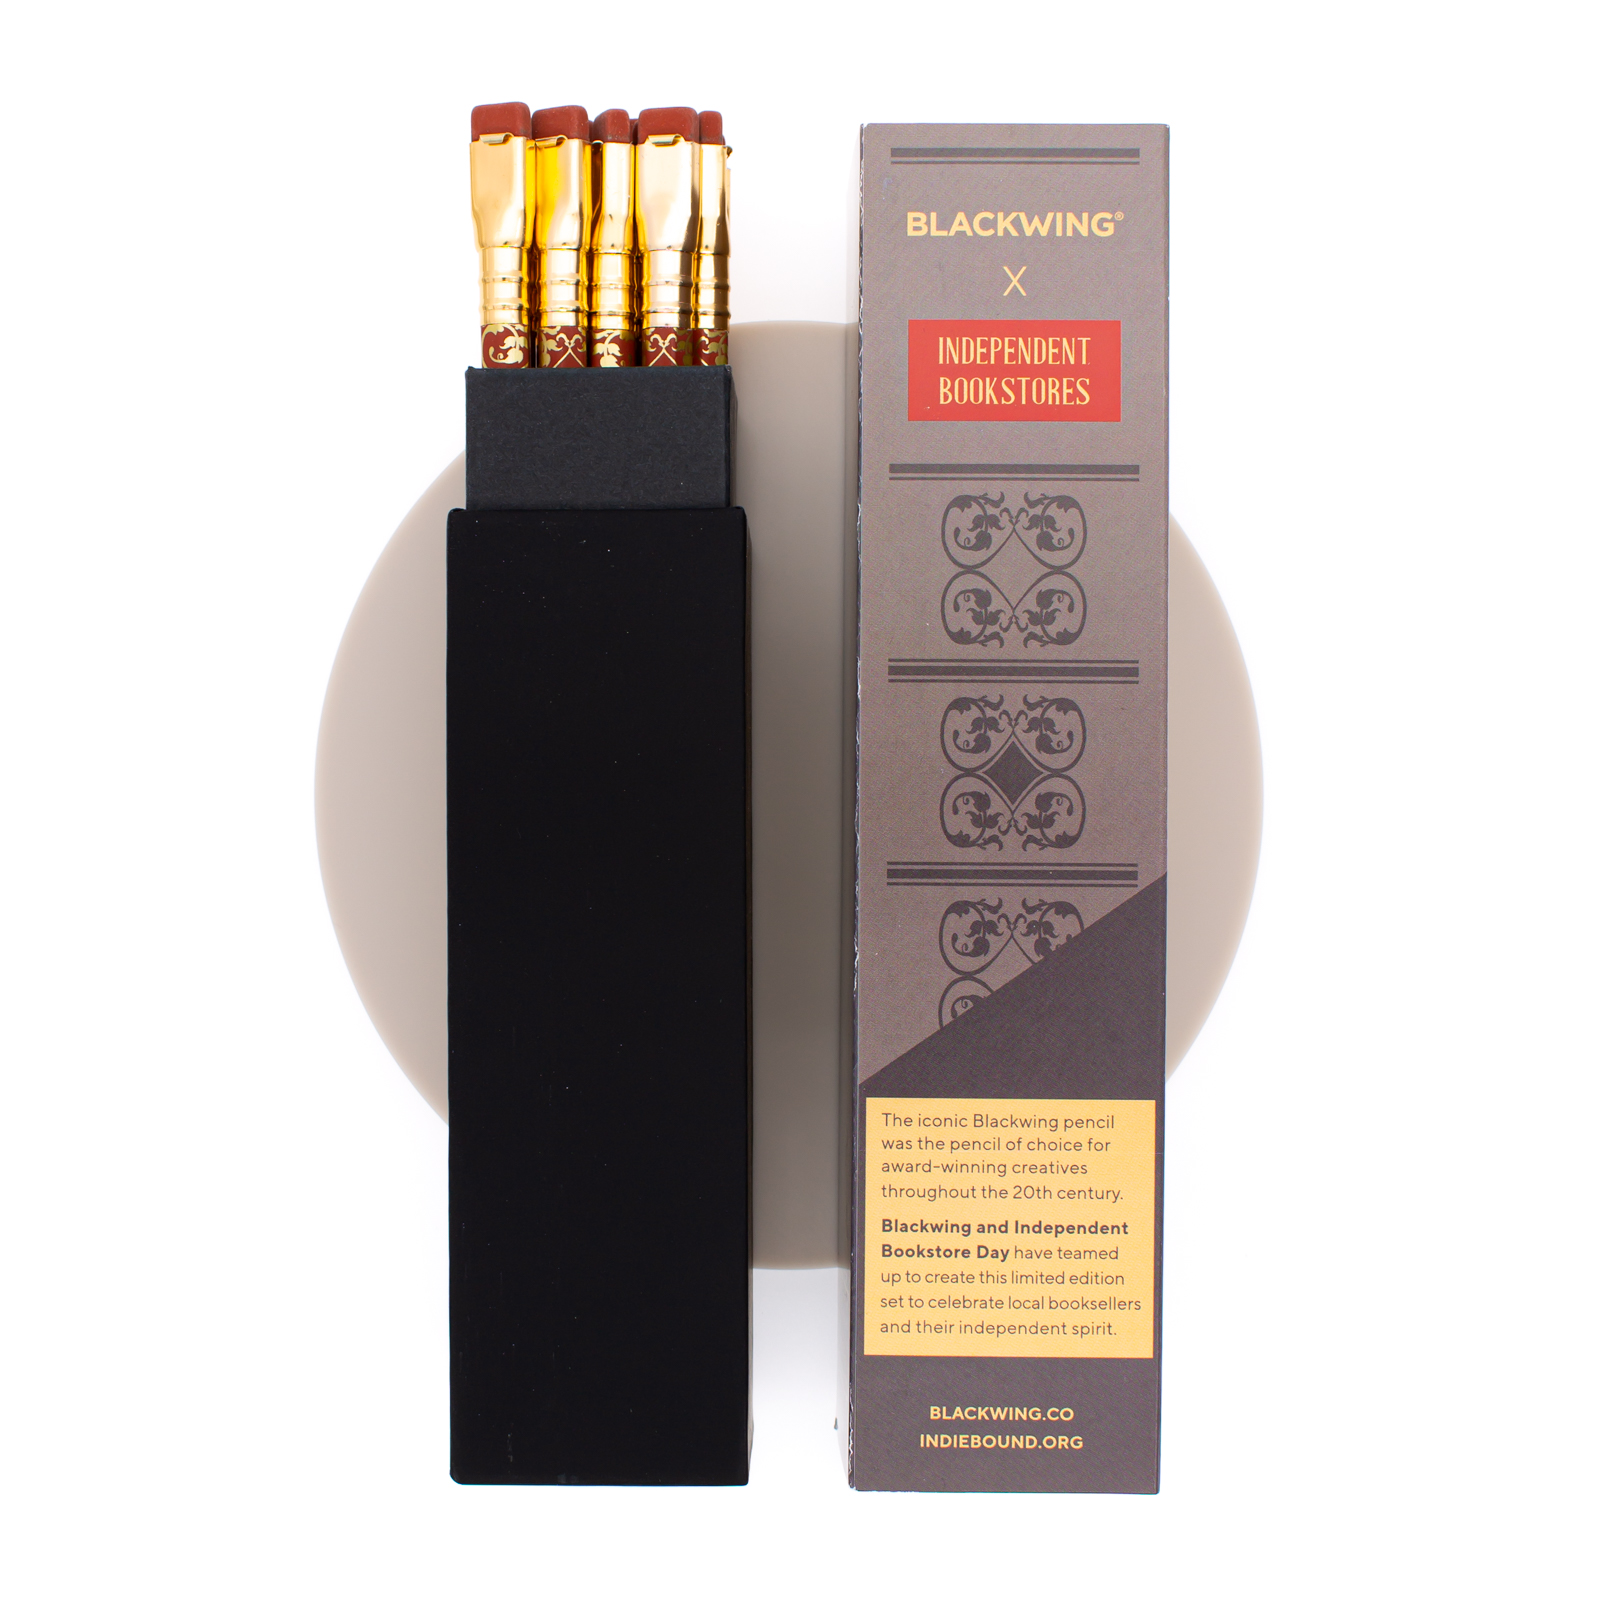 Blackwing x Independent Bookstores Set of 12 Pencils Limited Edition